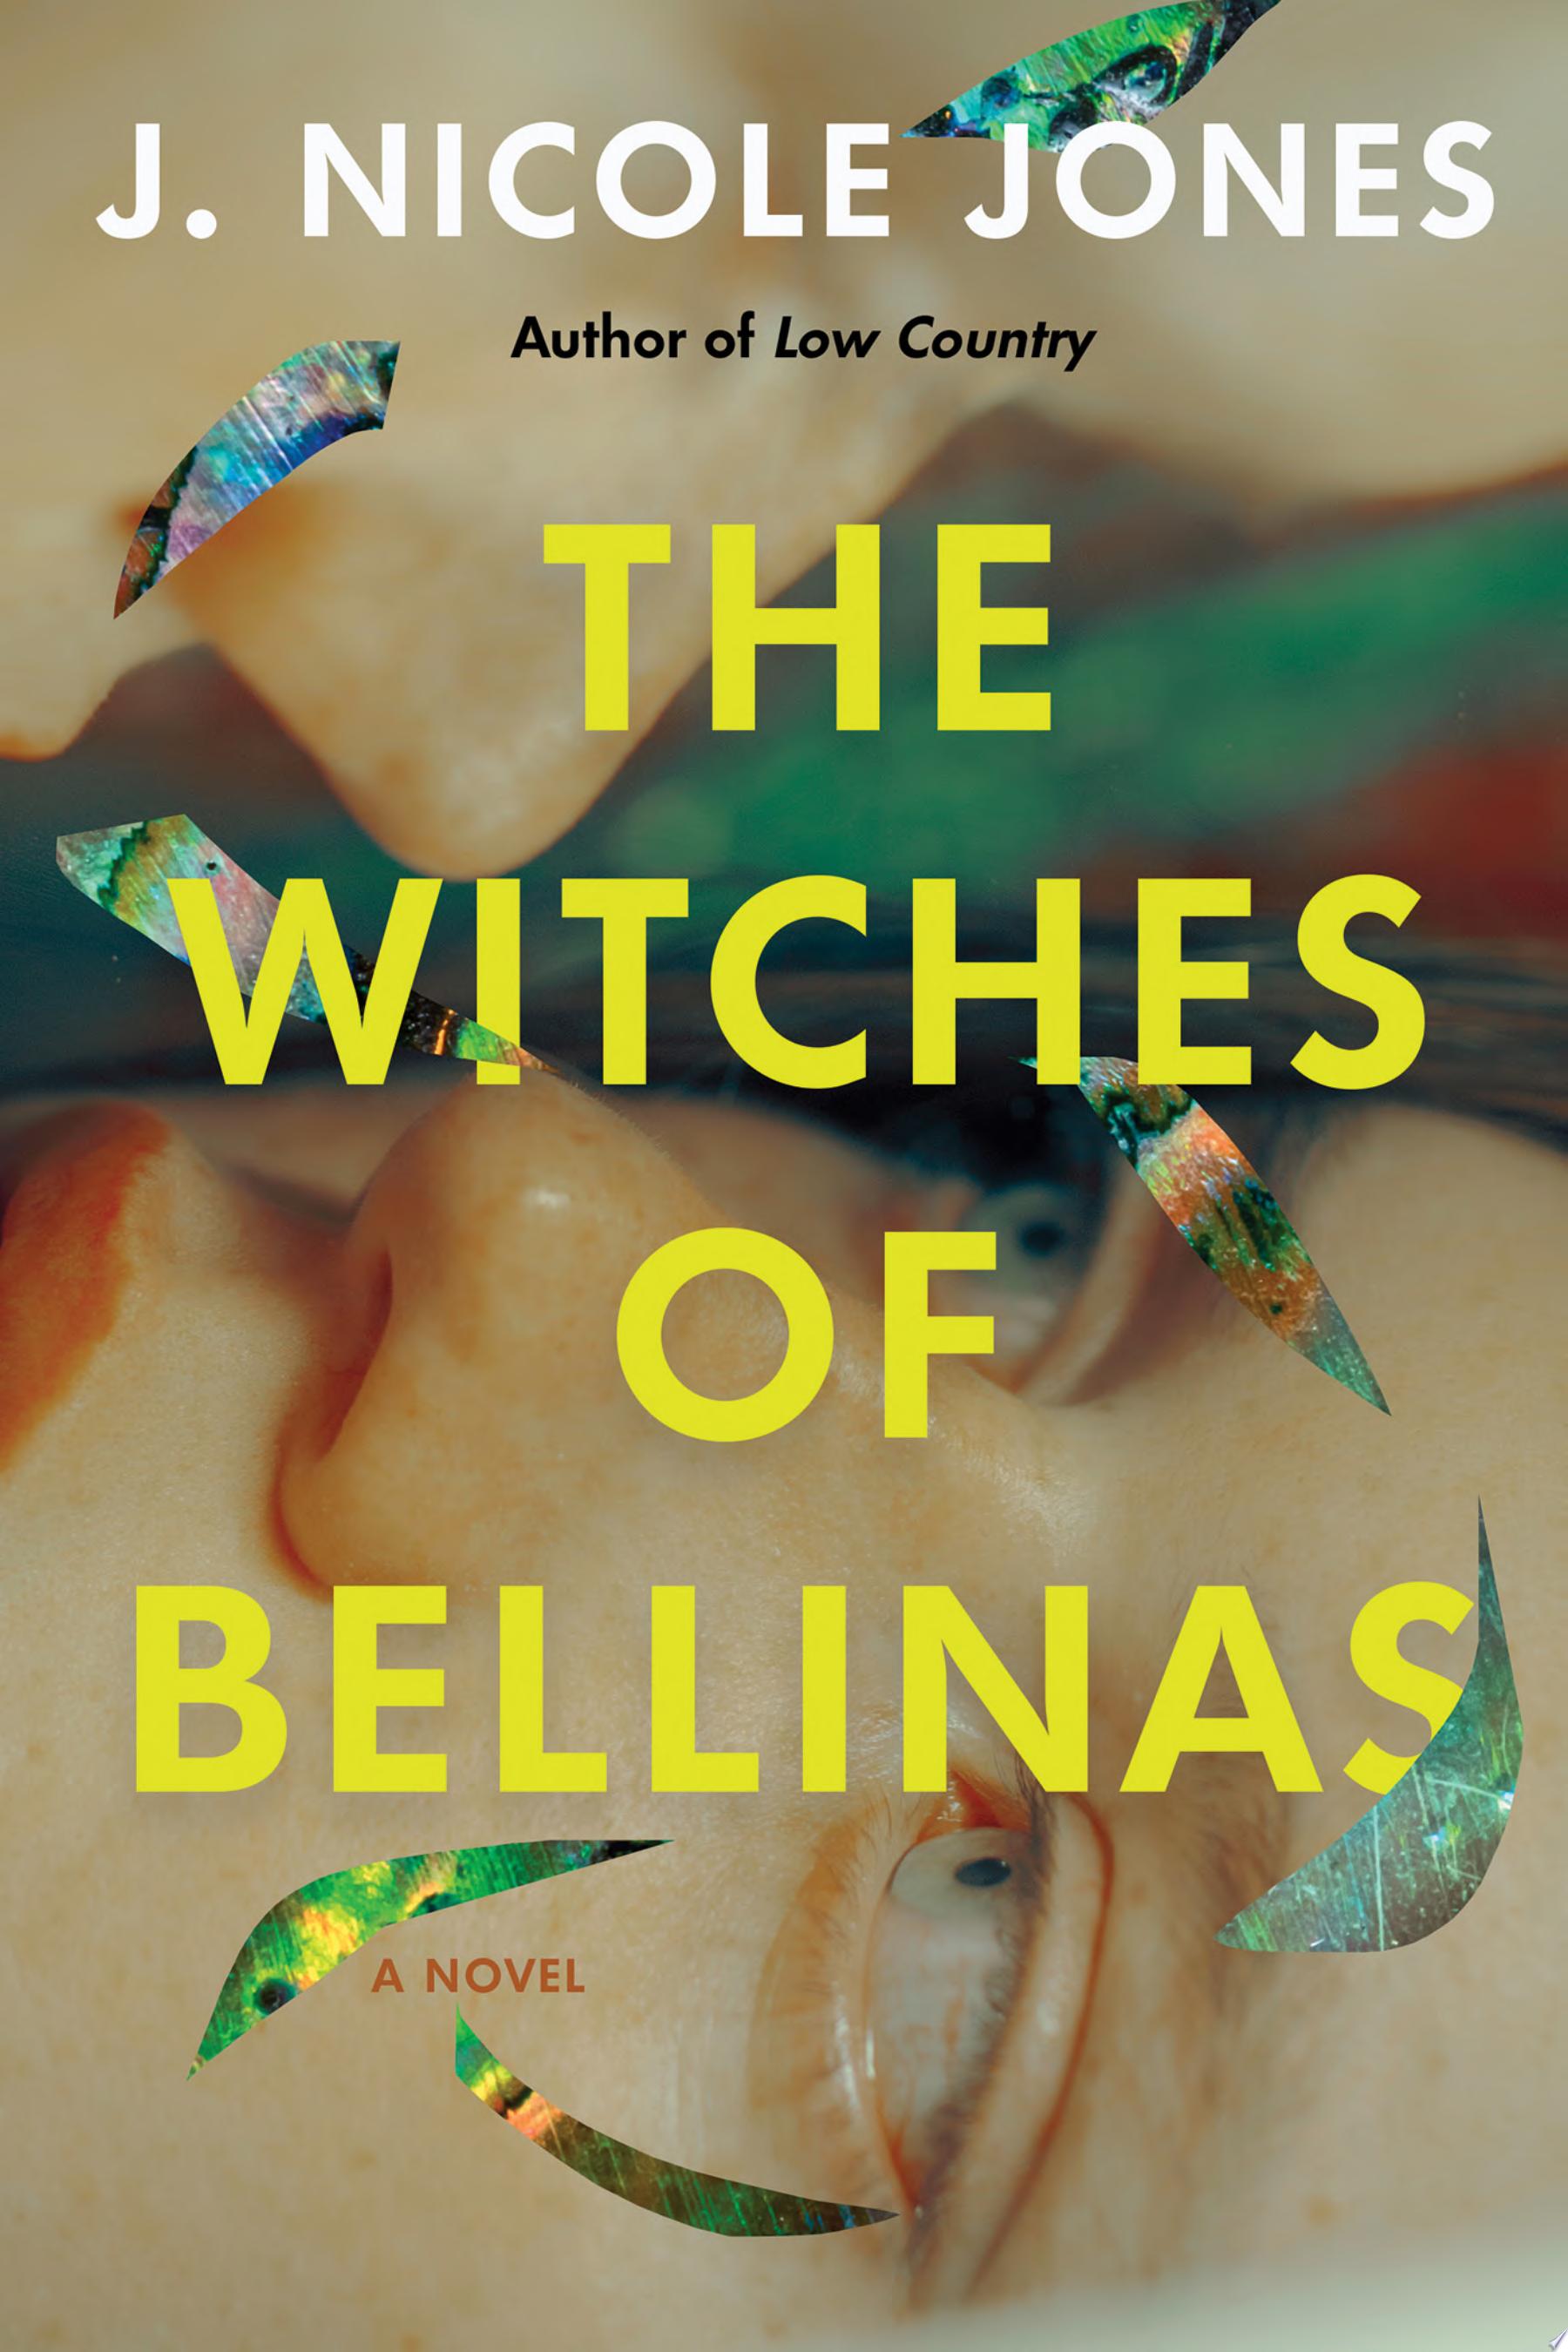 Image for "The Witches of Bellinas" by J. Nicole Jones